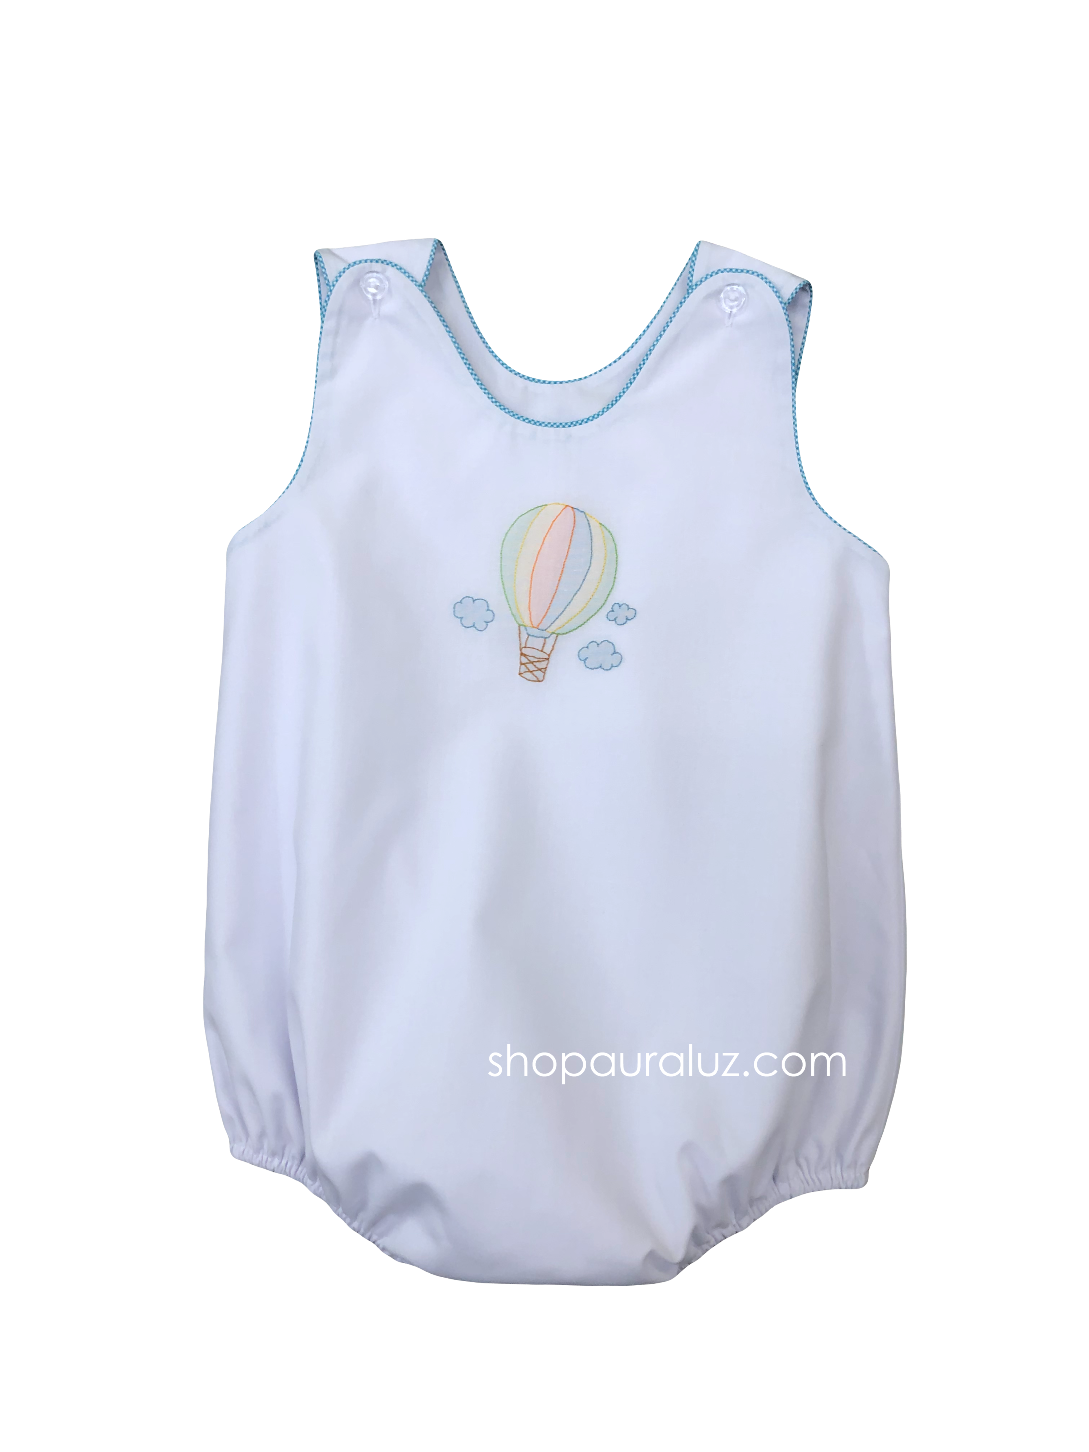 Auraluz Sleeveless Bubble...White with aqua check trim and embroidered hot air balloon